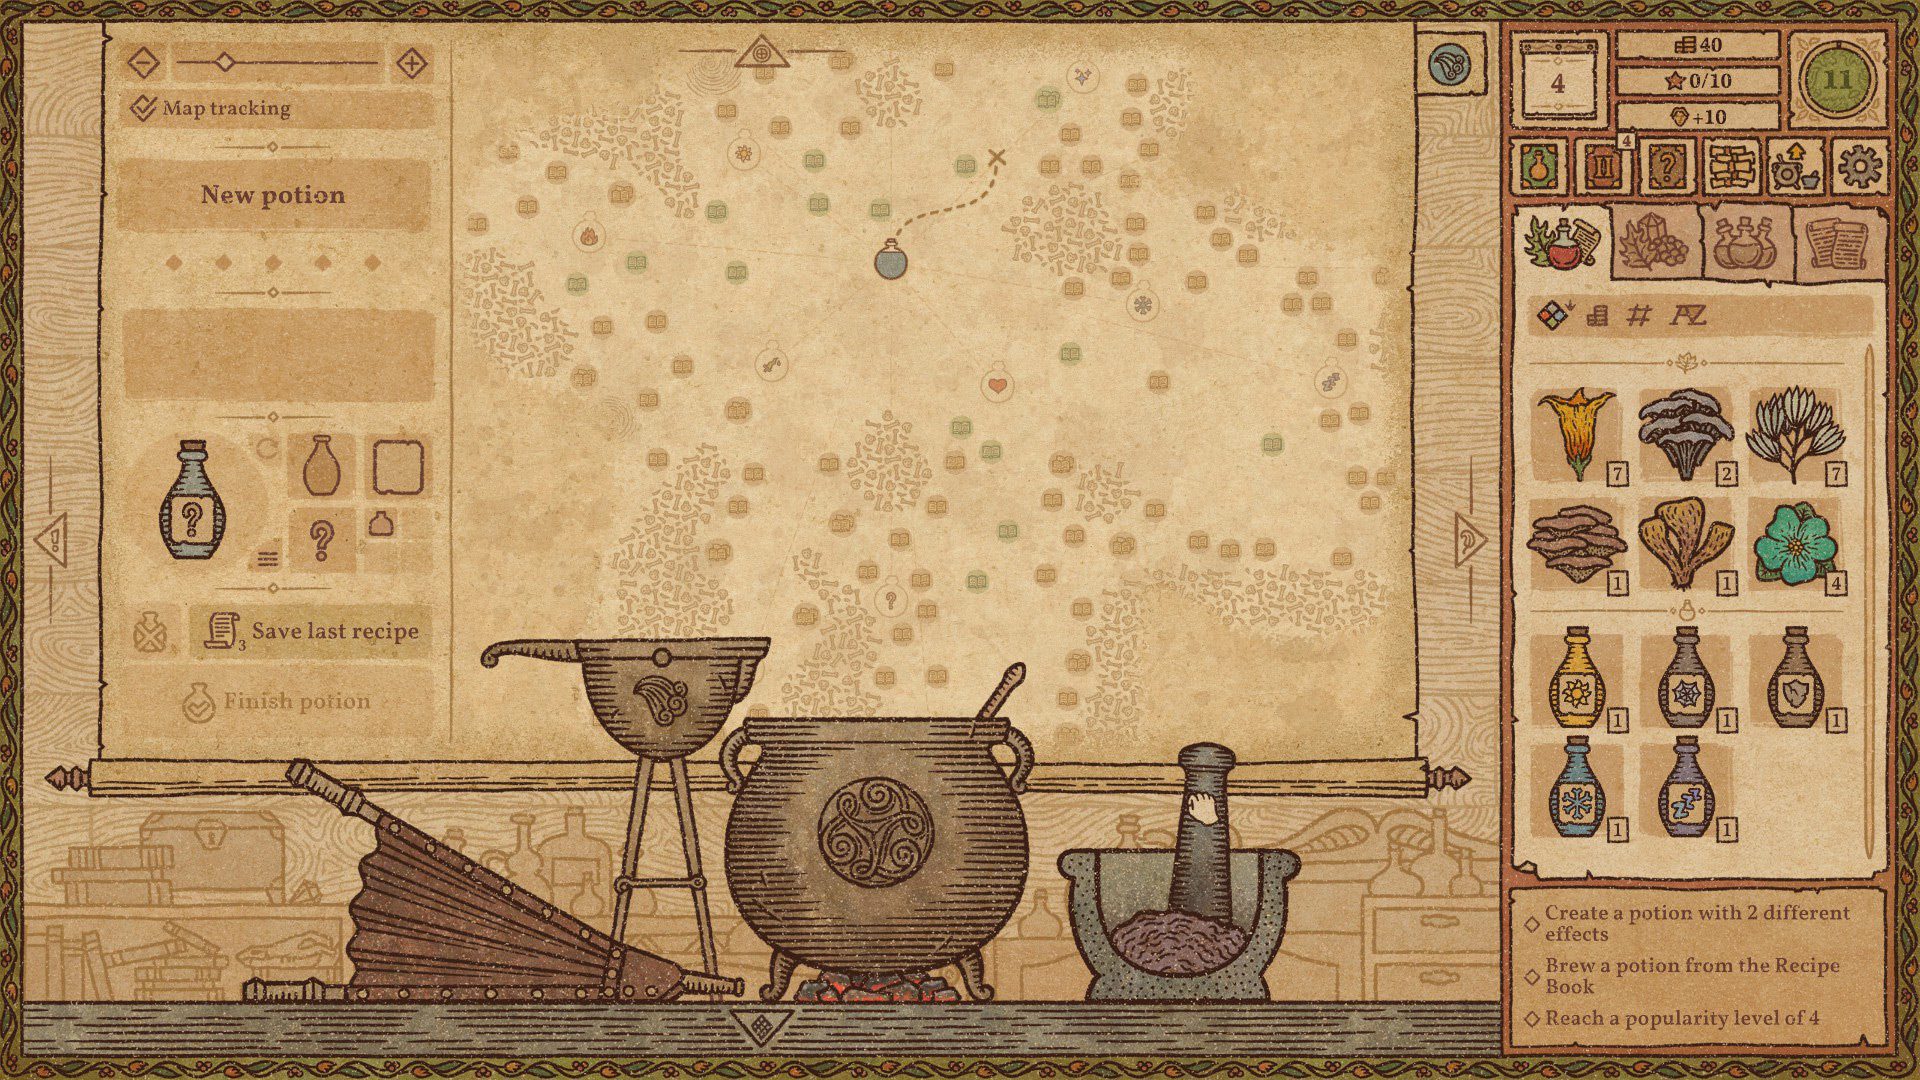 A wider view of the alchemic map